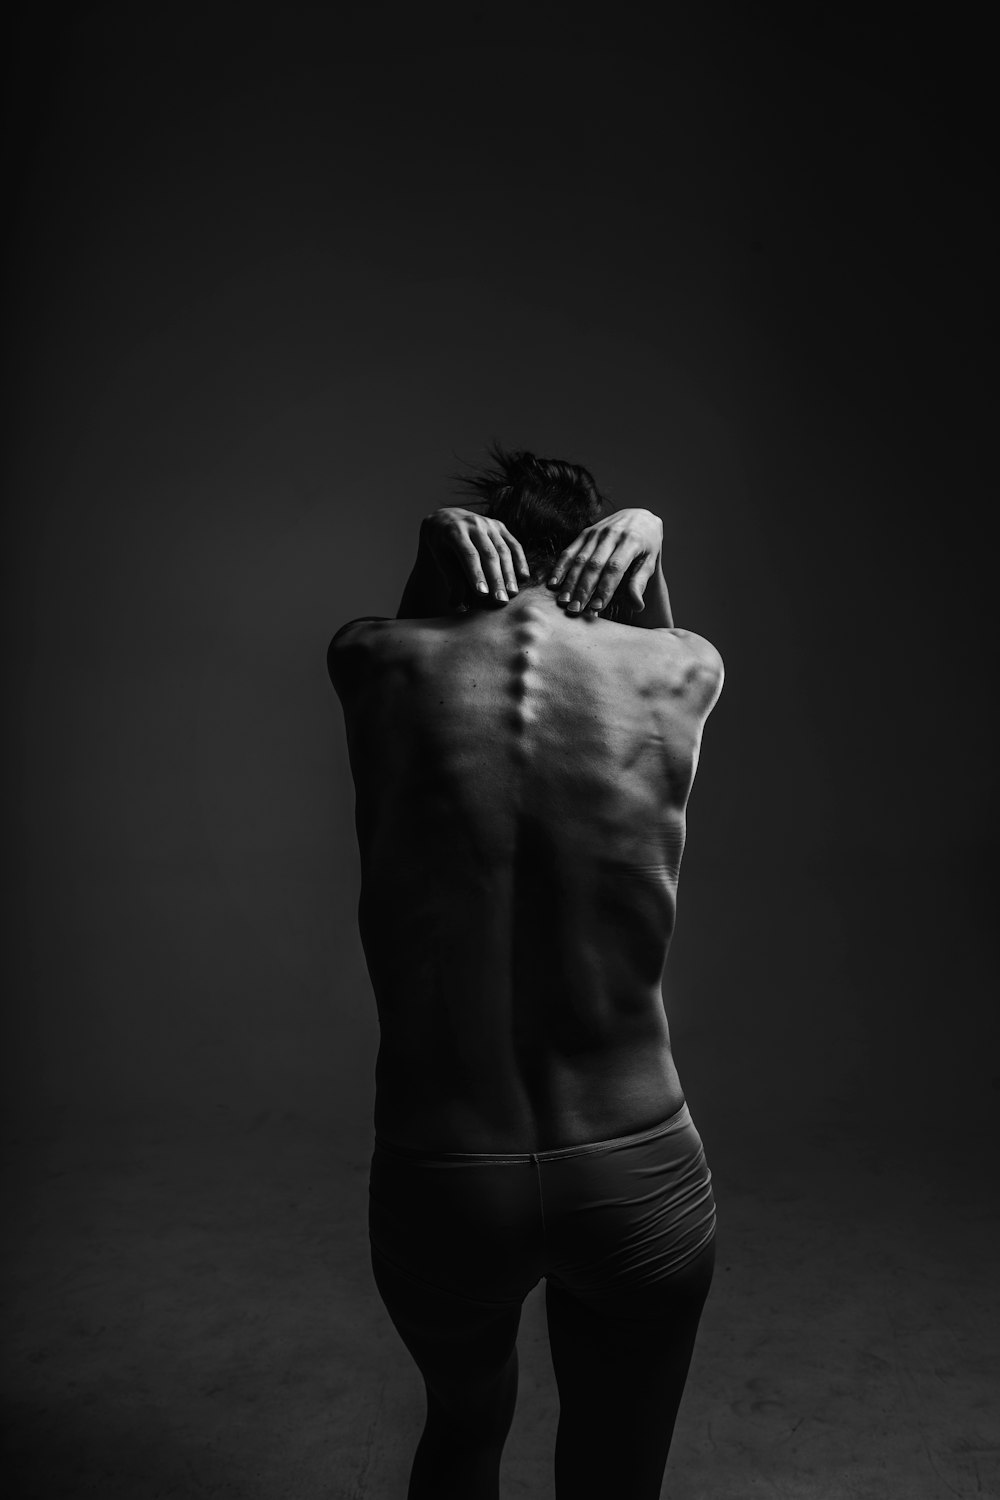 A black and white image of a person sticking their spine out in a photography studio in Kyiv city